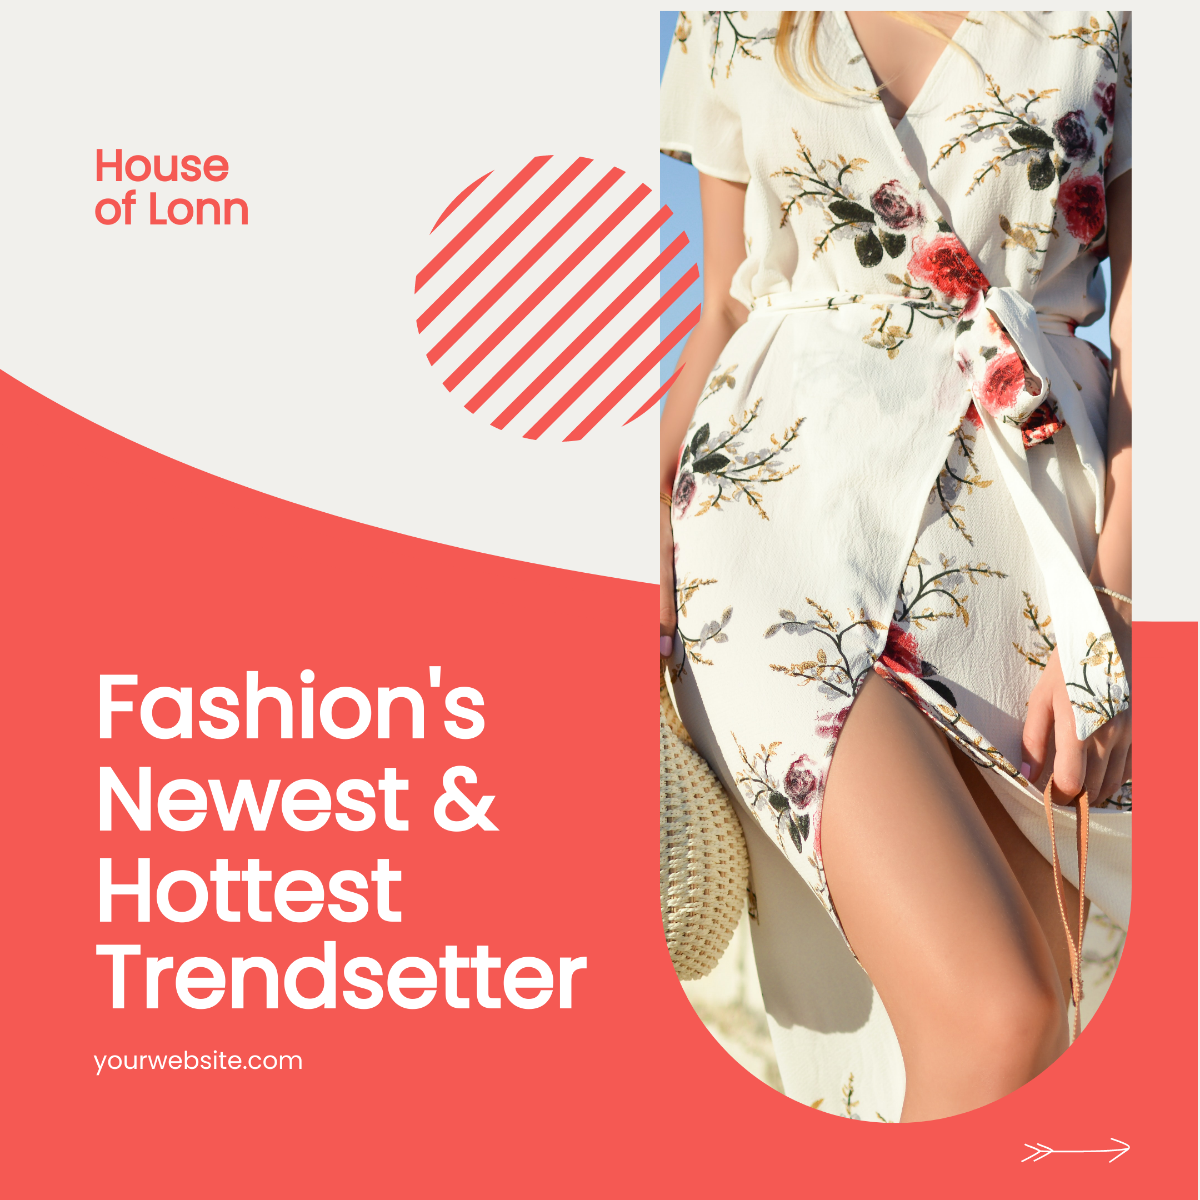 Fashion Collection Instagram Carousel Ad Template